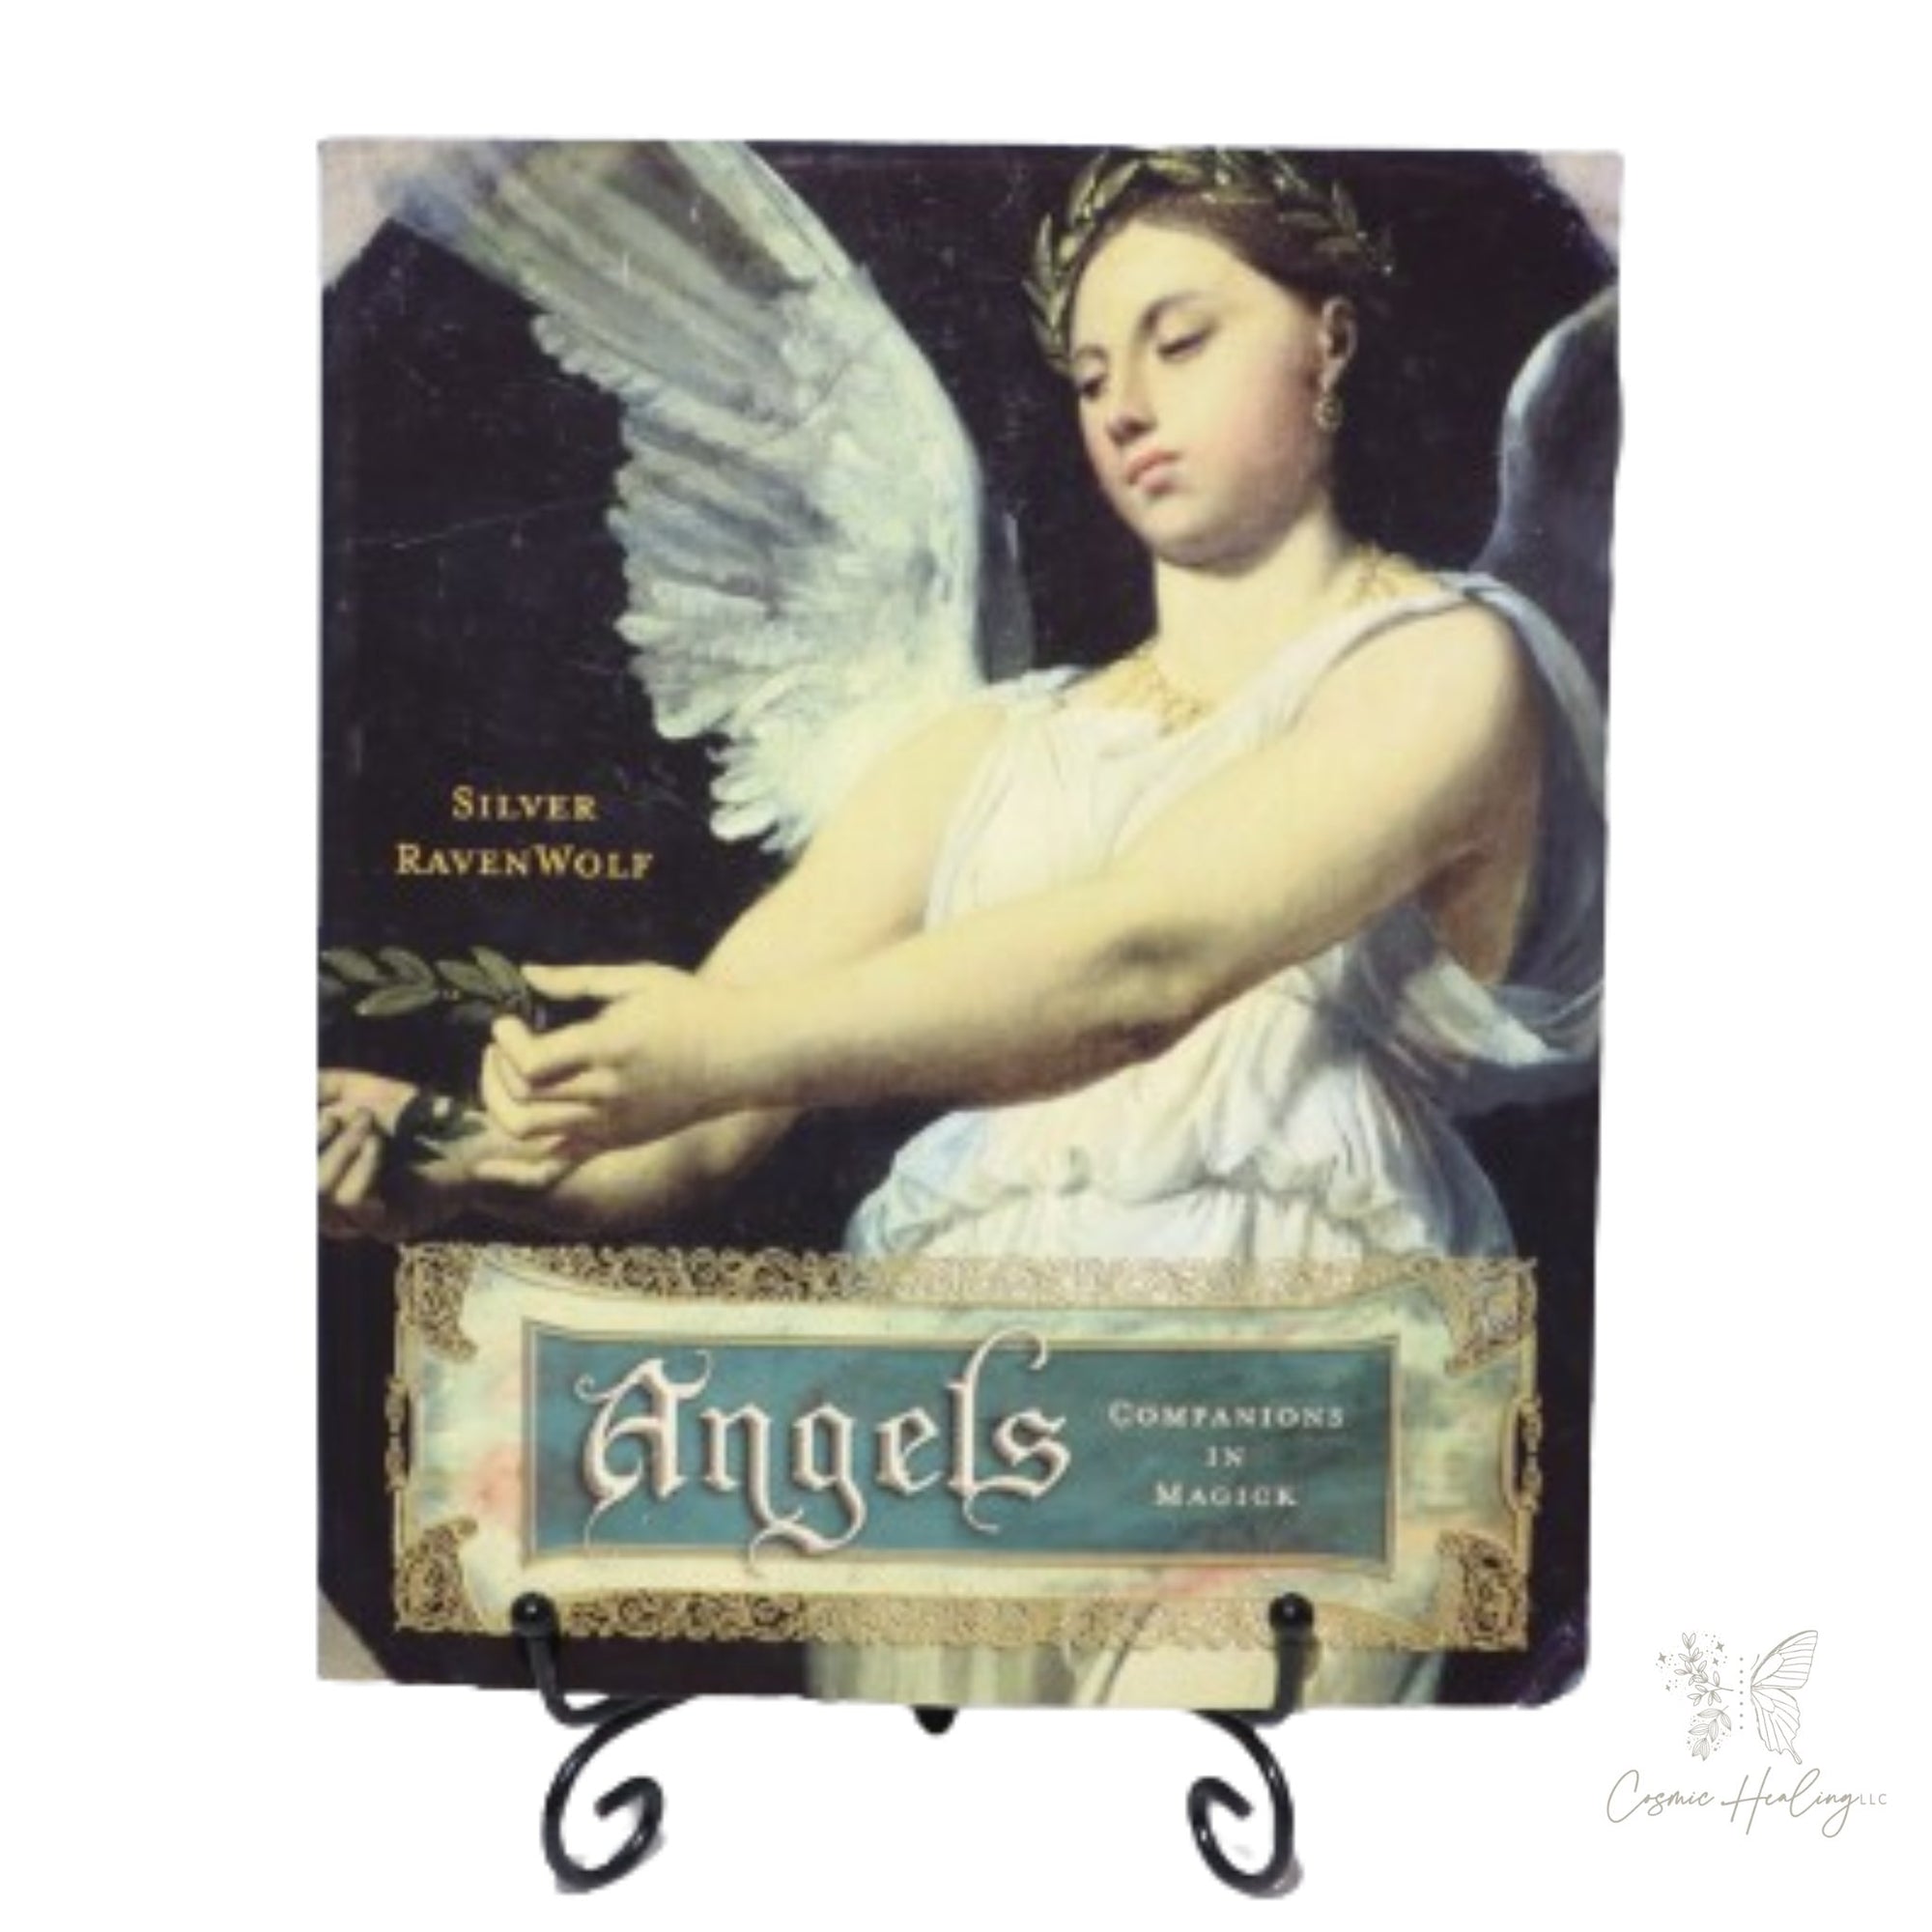 Angels: Companions in Magick by Silver RavenWolf - Shop Cosmic Healing